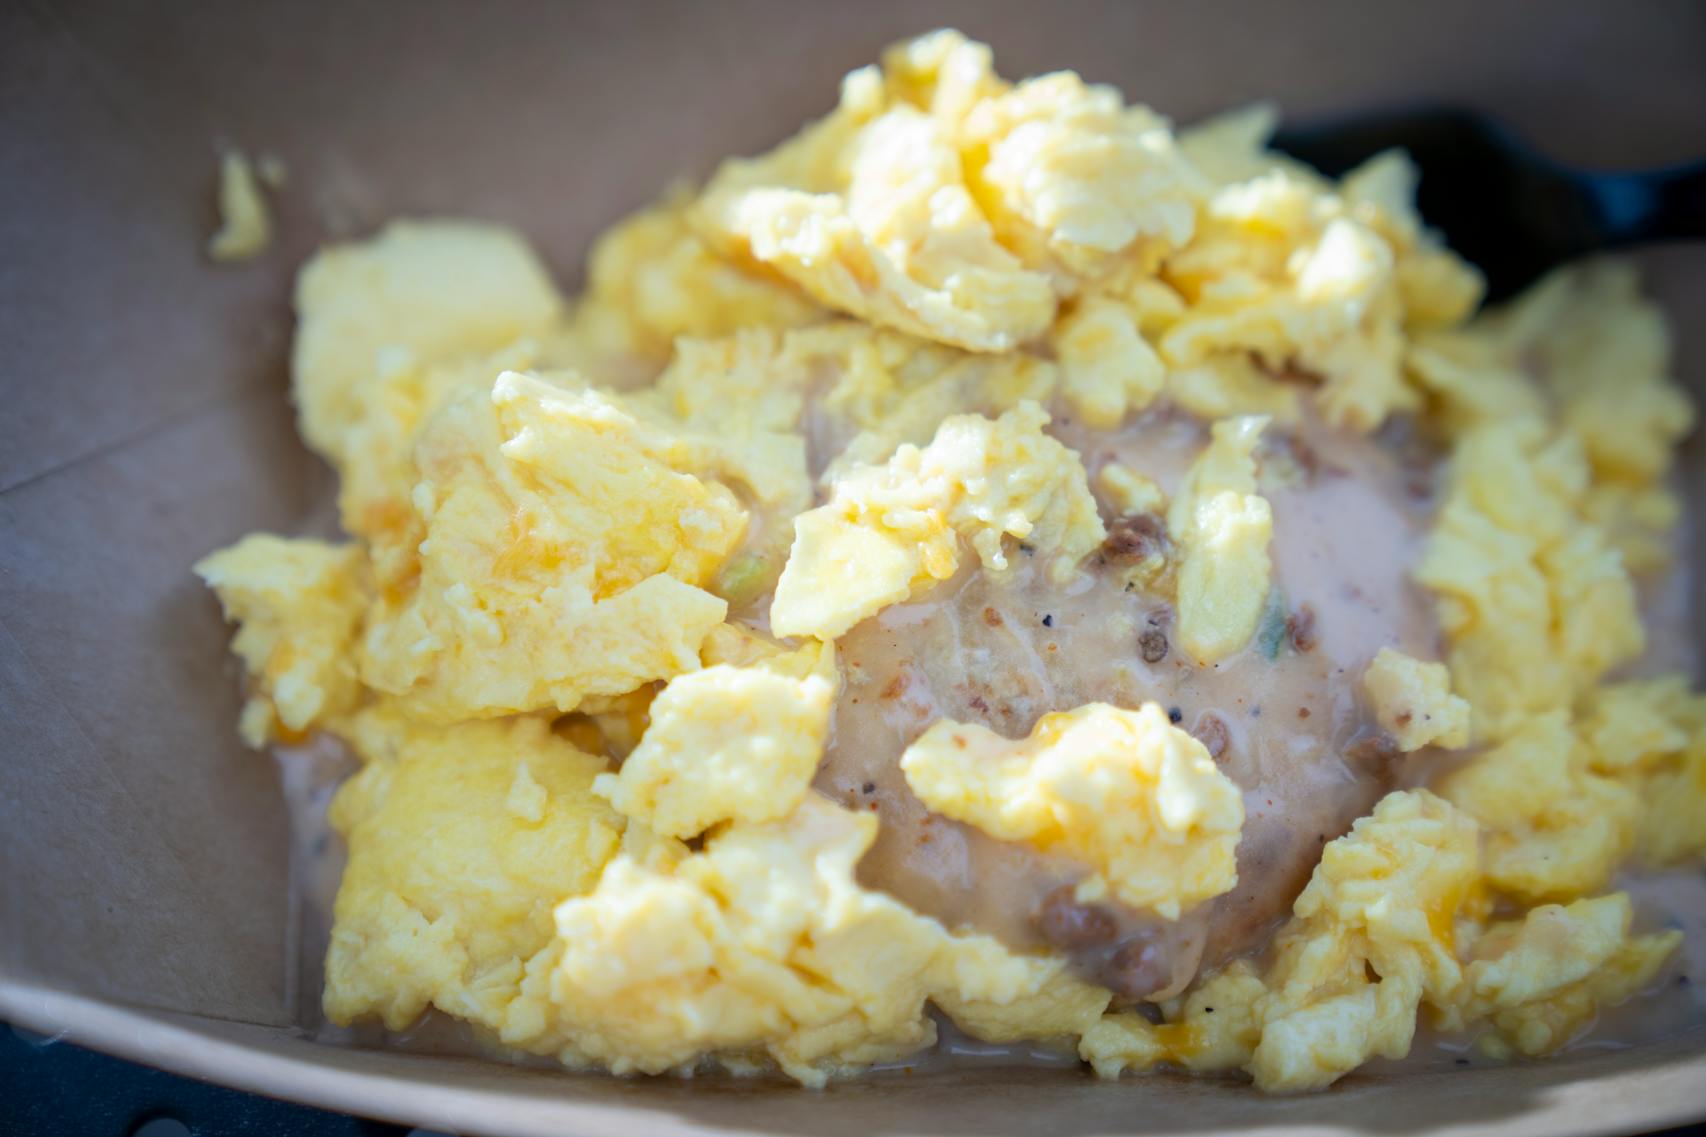 Not Your Madre’s Biscuit & Gravy from Lulu’s Public House. The new foods of the 2023 Minnesota State Fair photographed on the first day of the fair in Falcon Heights, Minn. on Tuesday, Aug. 8, 2023. ] LEILA NAVIDI • leila.navidi@startribune.com